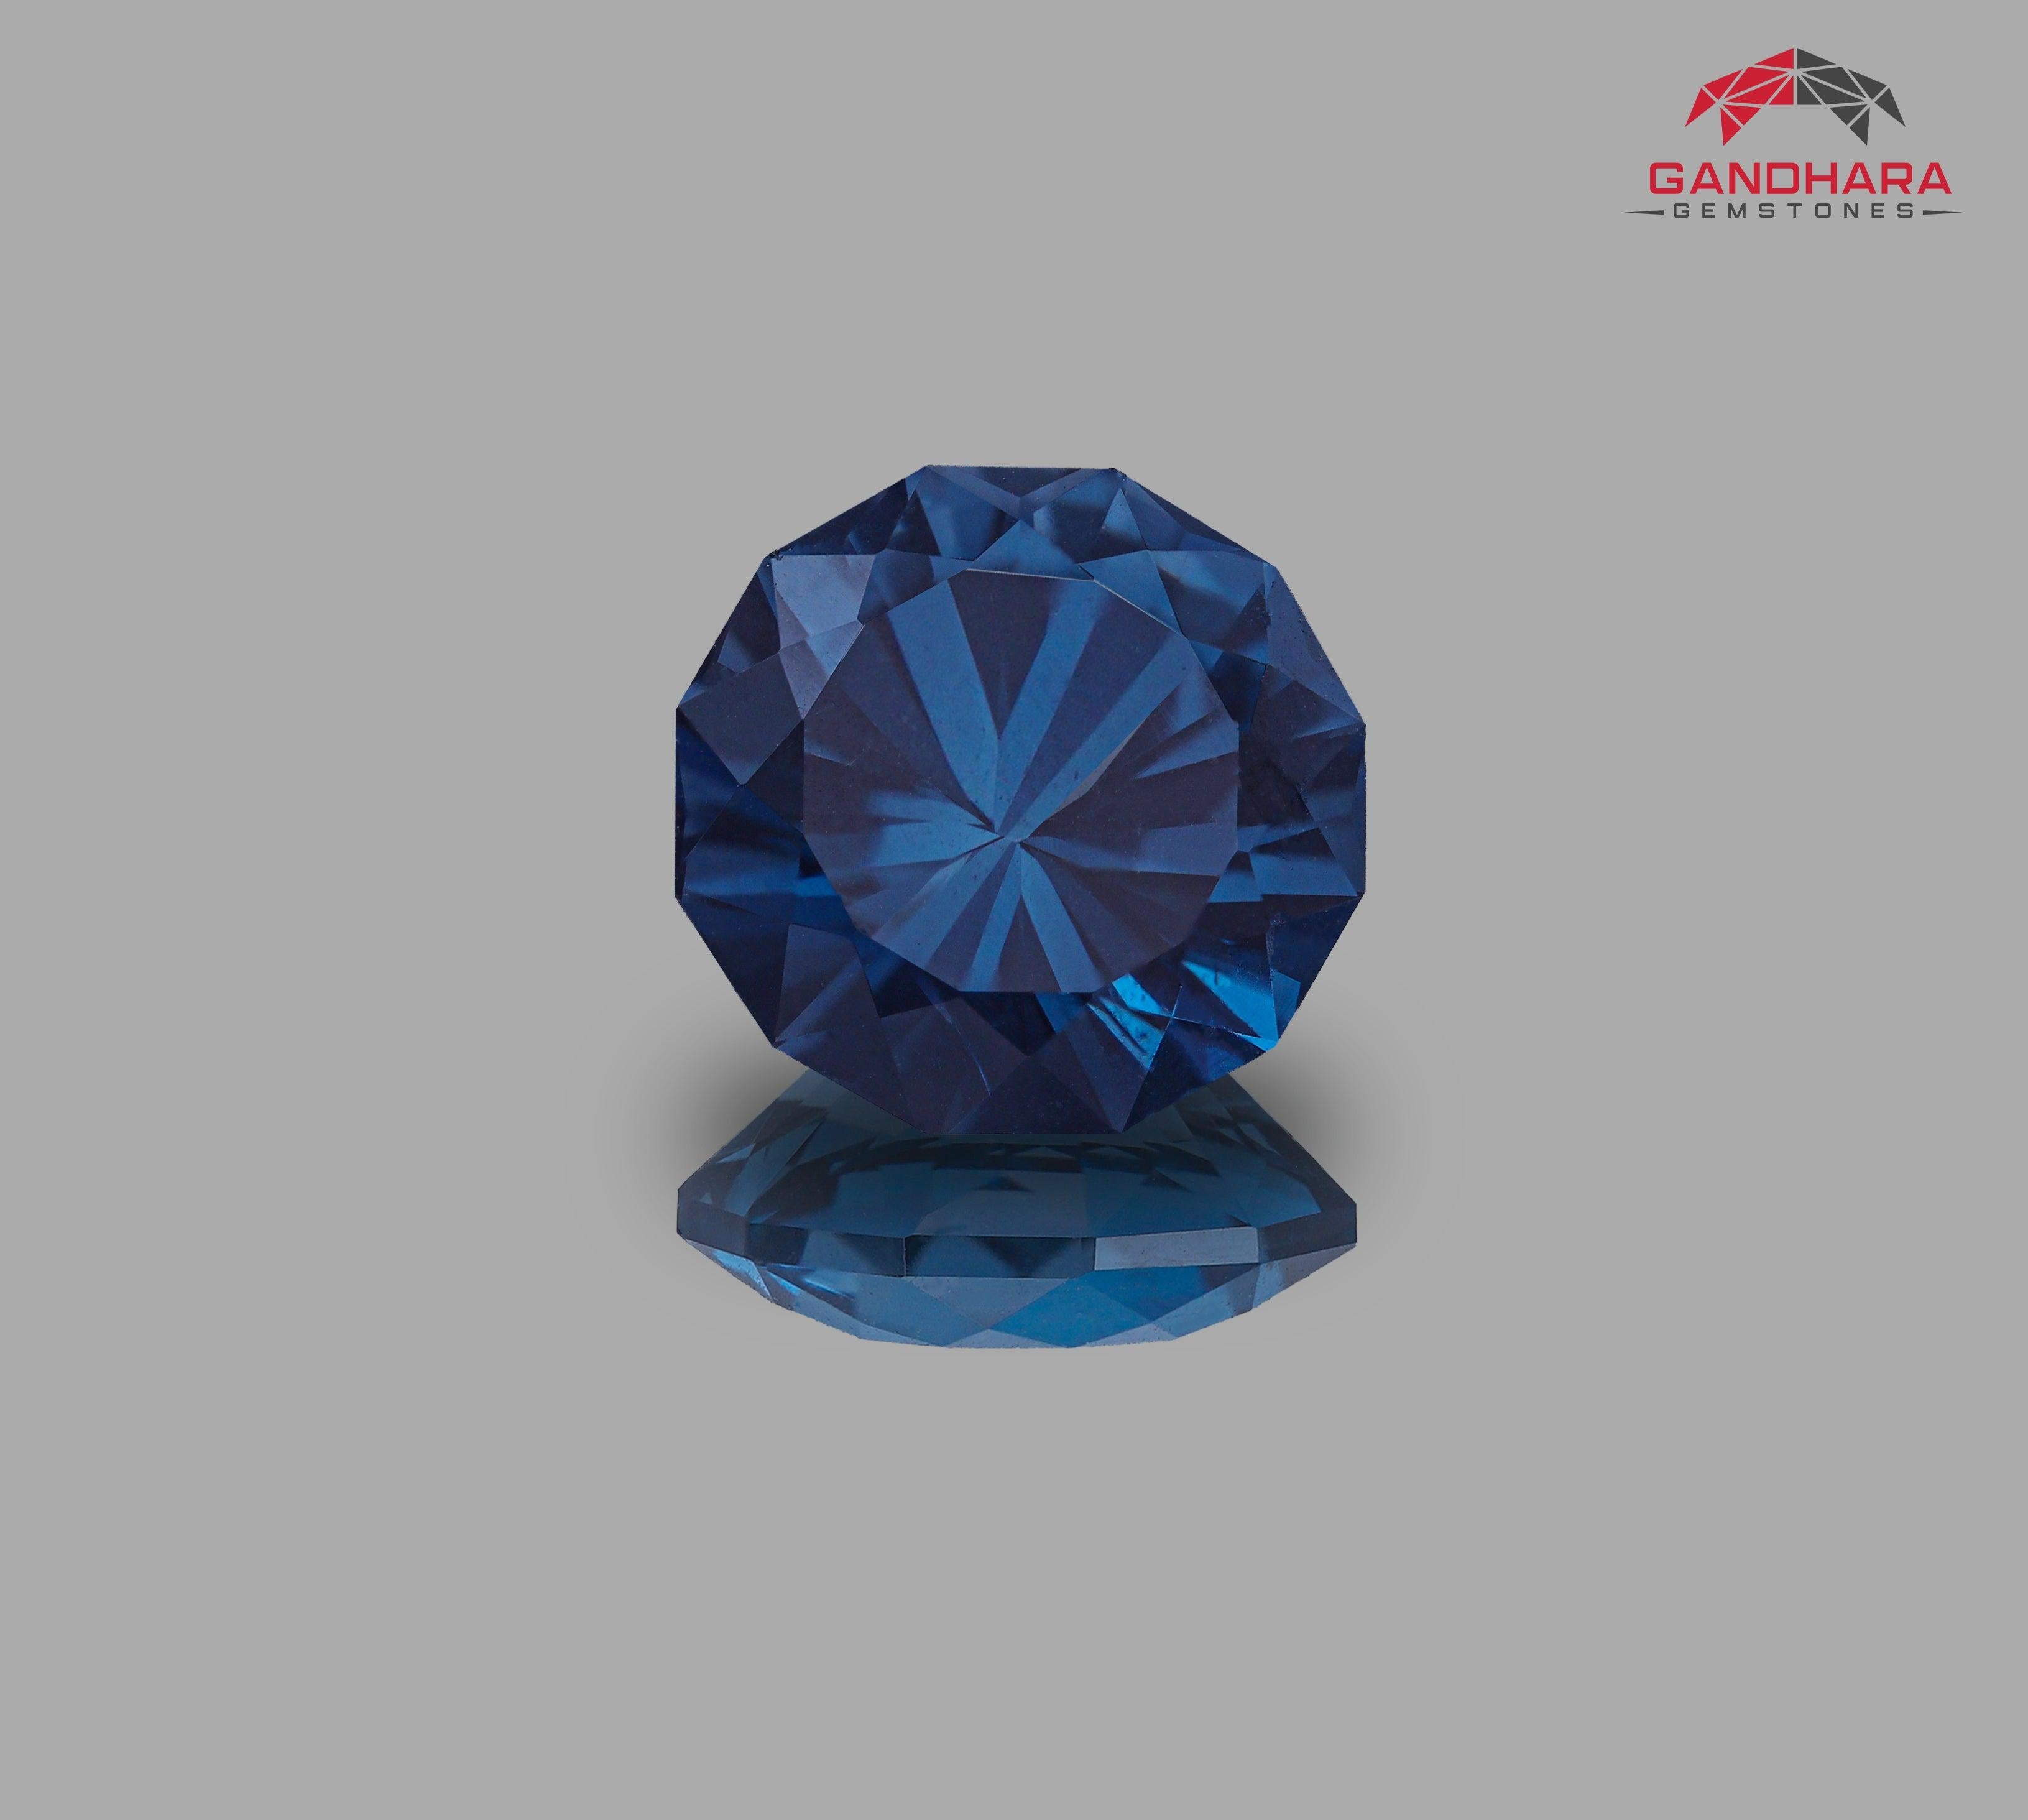 Lovely Round Cut London Blue Topaz of 3.685 carats from Madagascar has a wonderful cut in a Round shape, incredible Blue color. Great brilliance. This gem is totally Loupe-Clean. 

Product Information:
GEMSTONE NAME: Lovely Round Cut London Blue